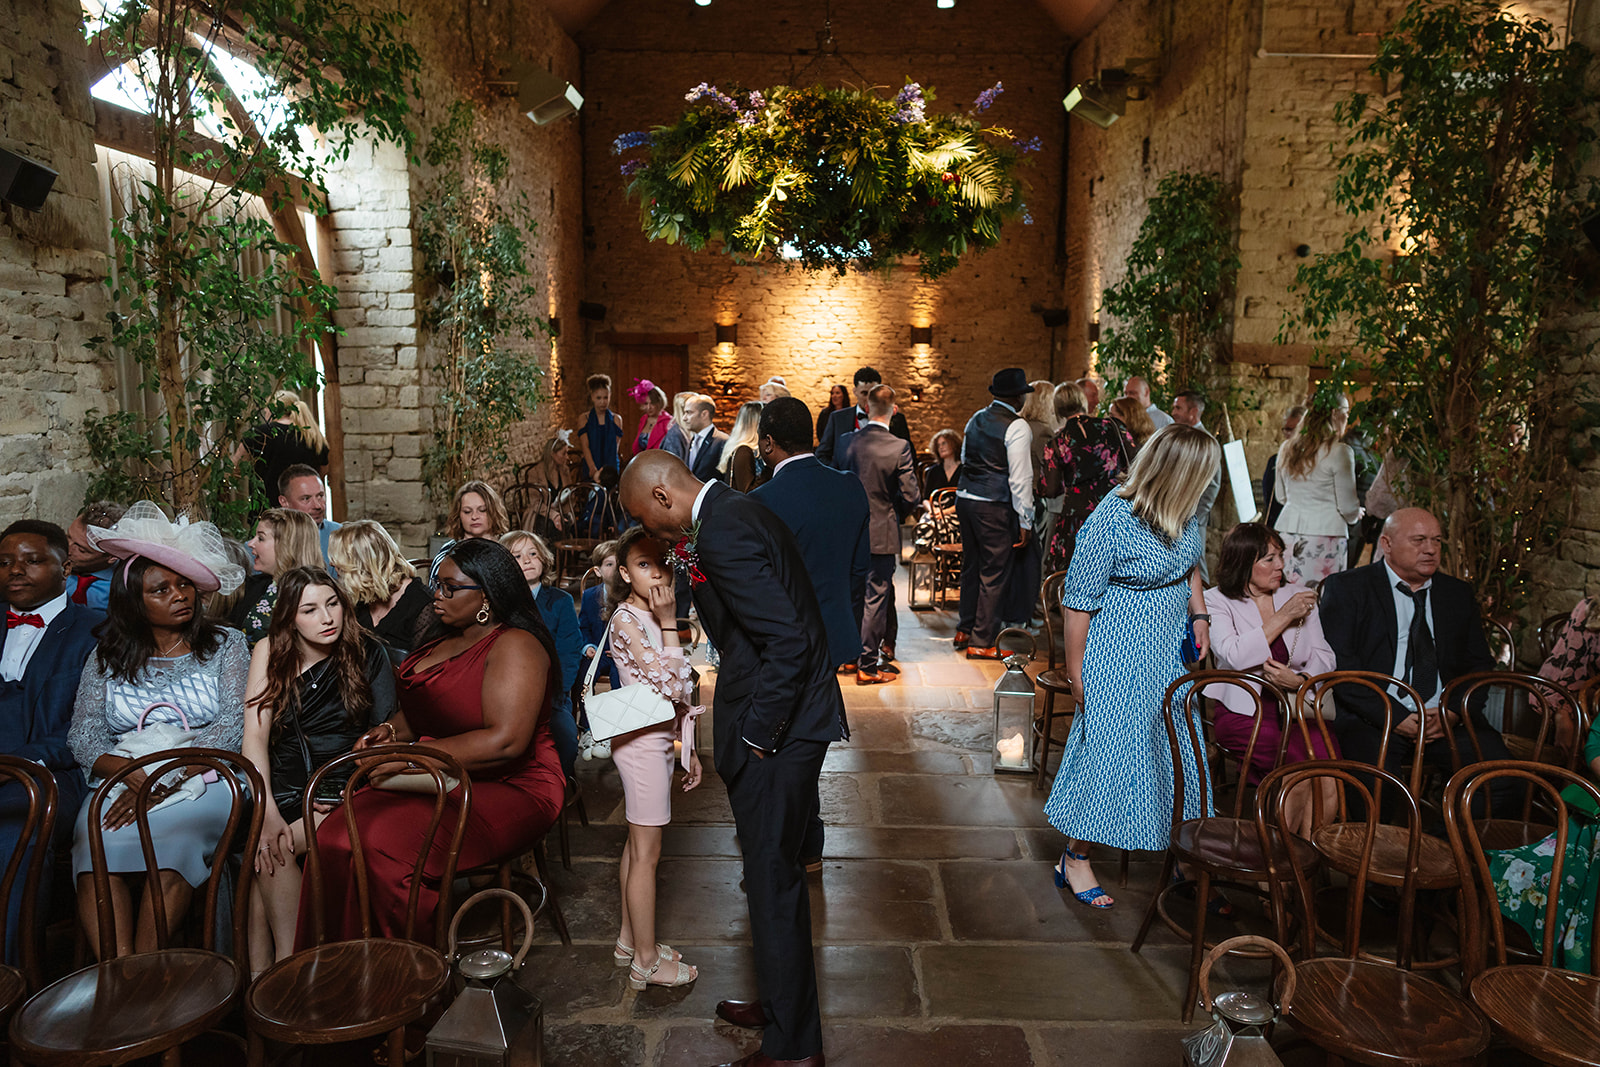 Guests taking their seats for the ceremony at Cripps Barn Cotswolds